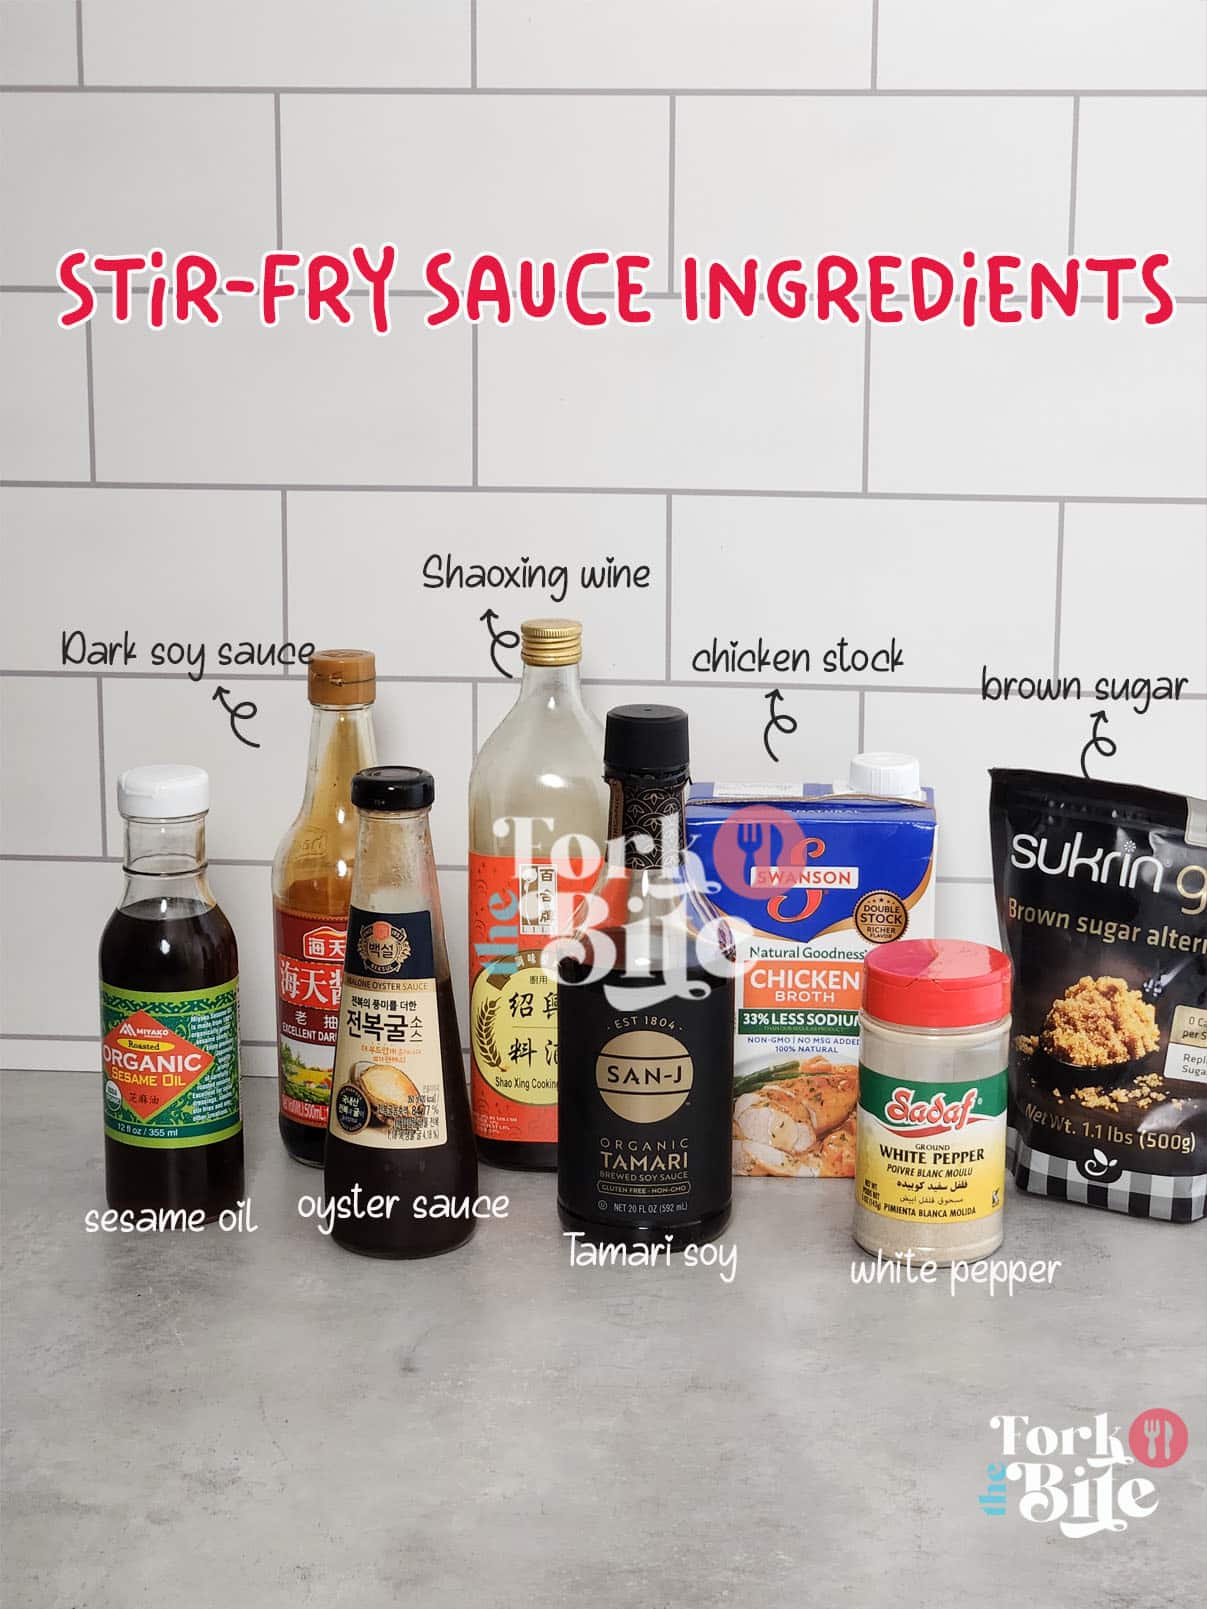 These well-rounded stir-fry sauce ingredients perfectly complement the steak, rice, and vegetables in the Yard House Steak Bowl, making each bite a true flavor sensation.